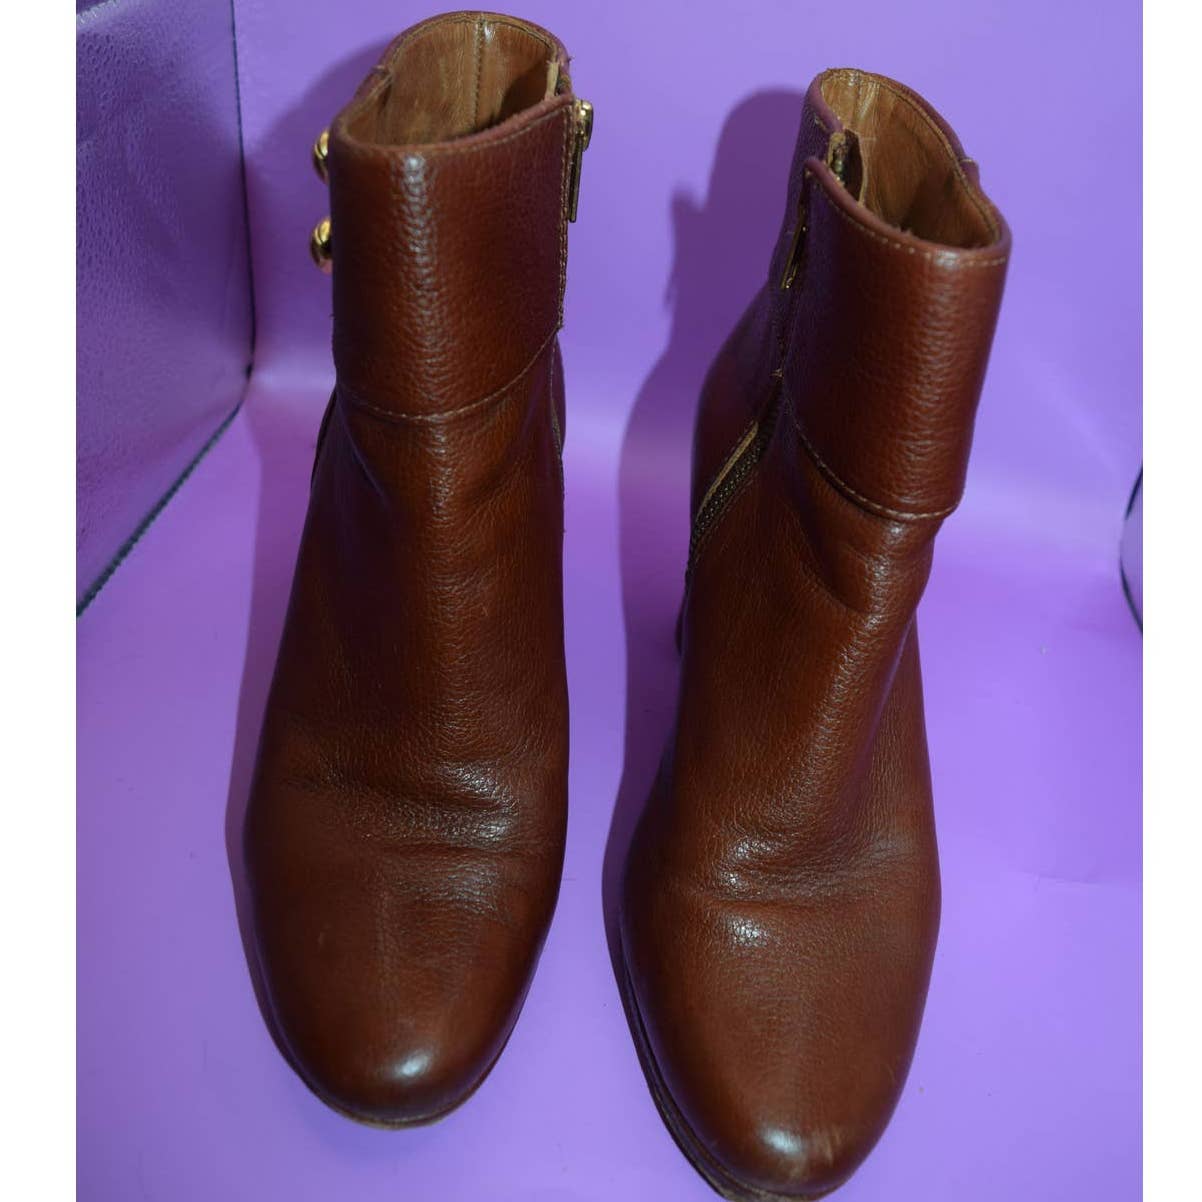 Kate Spade Peddled Cognac Brown Heeled Ankle Boots -8.5